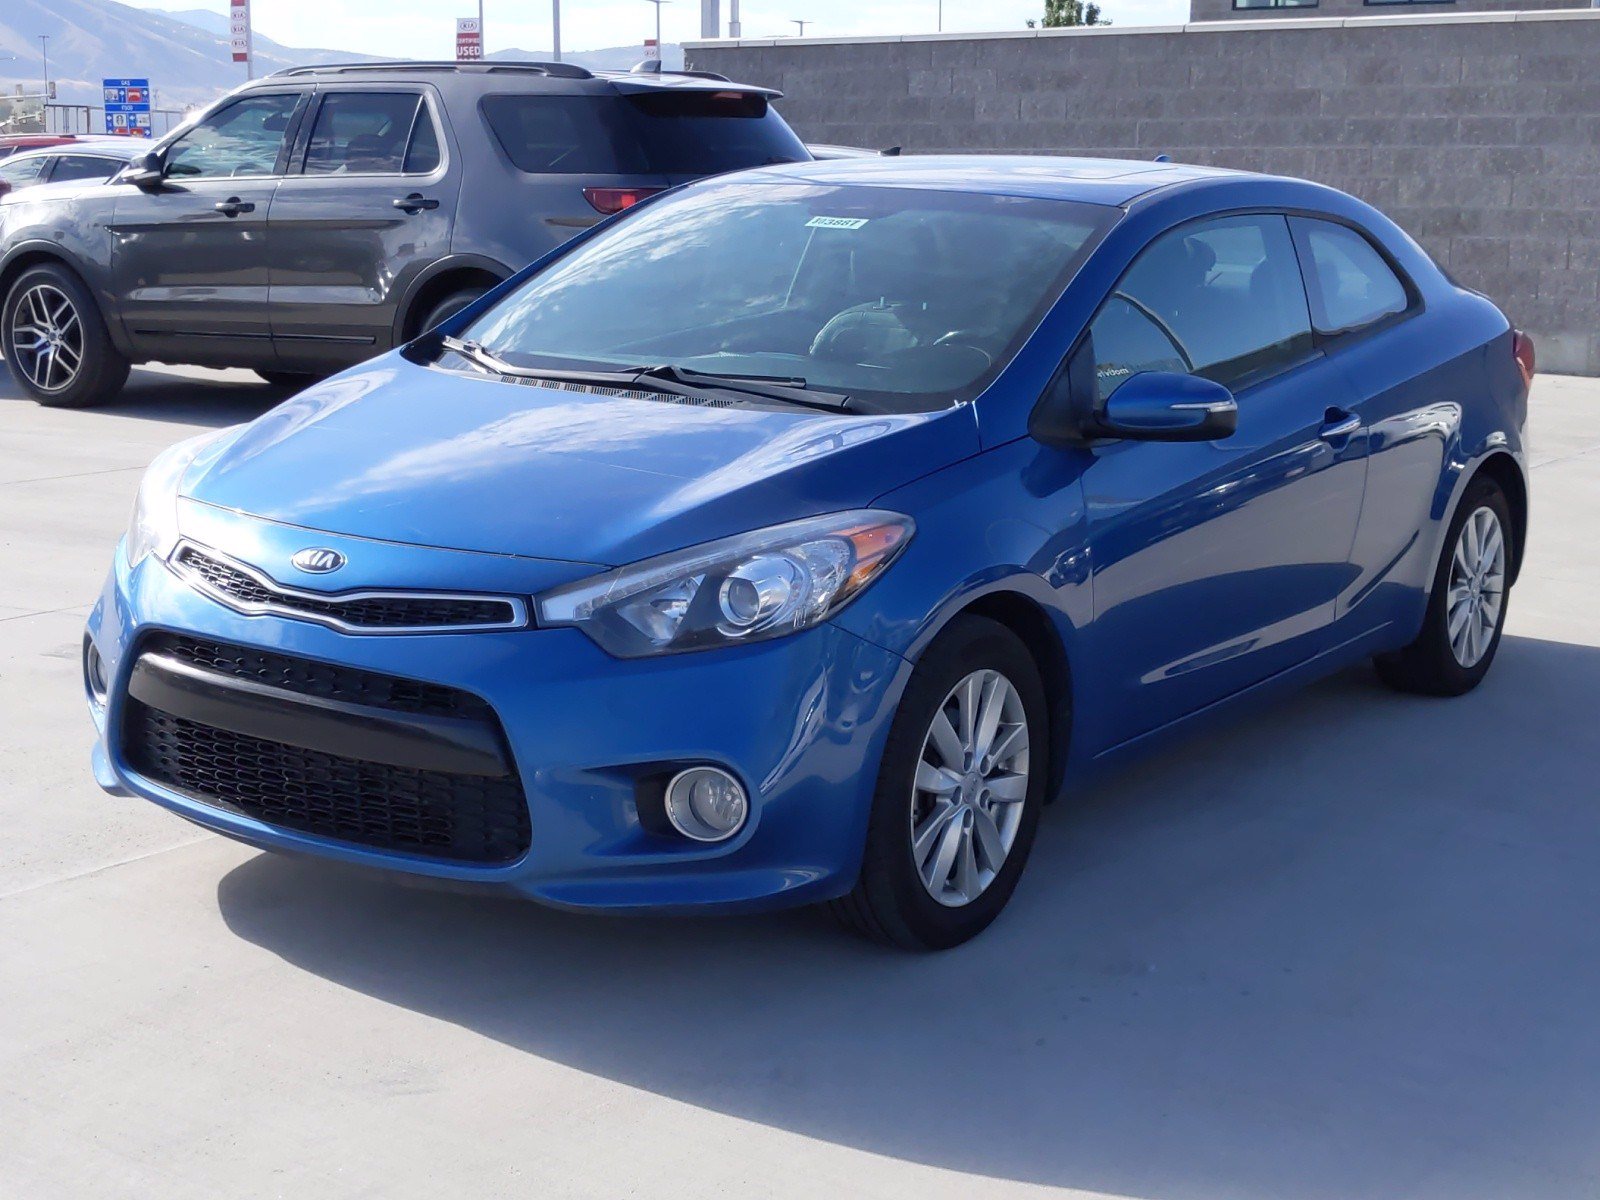 Pre-Owned 2014 Kia Forte Koup EX FWD 2dr Car